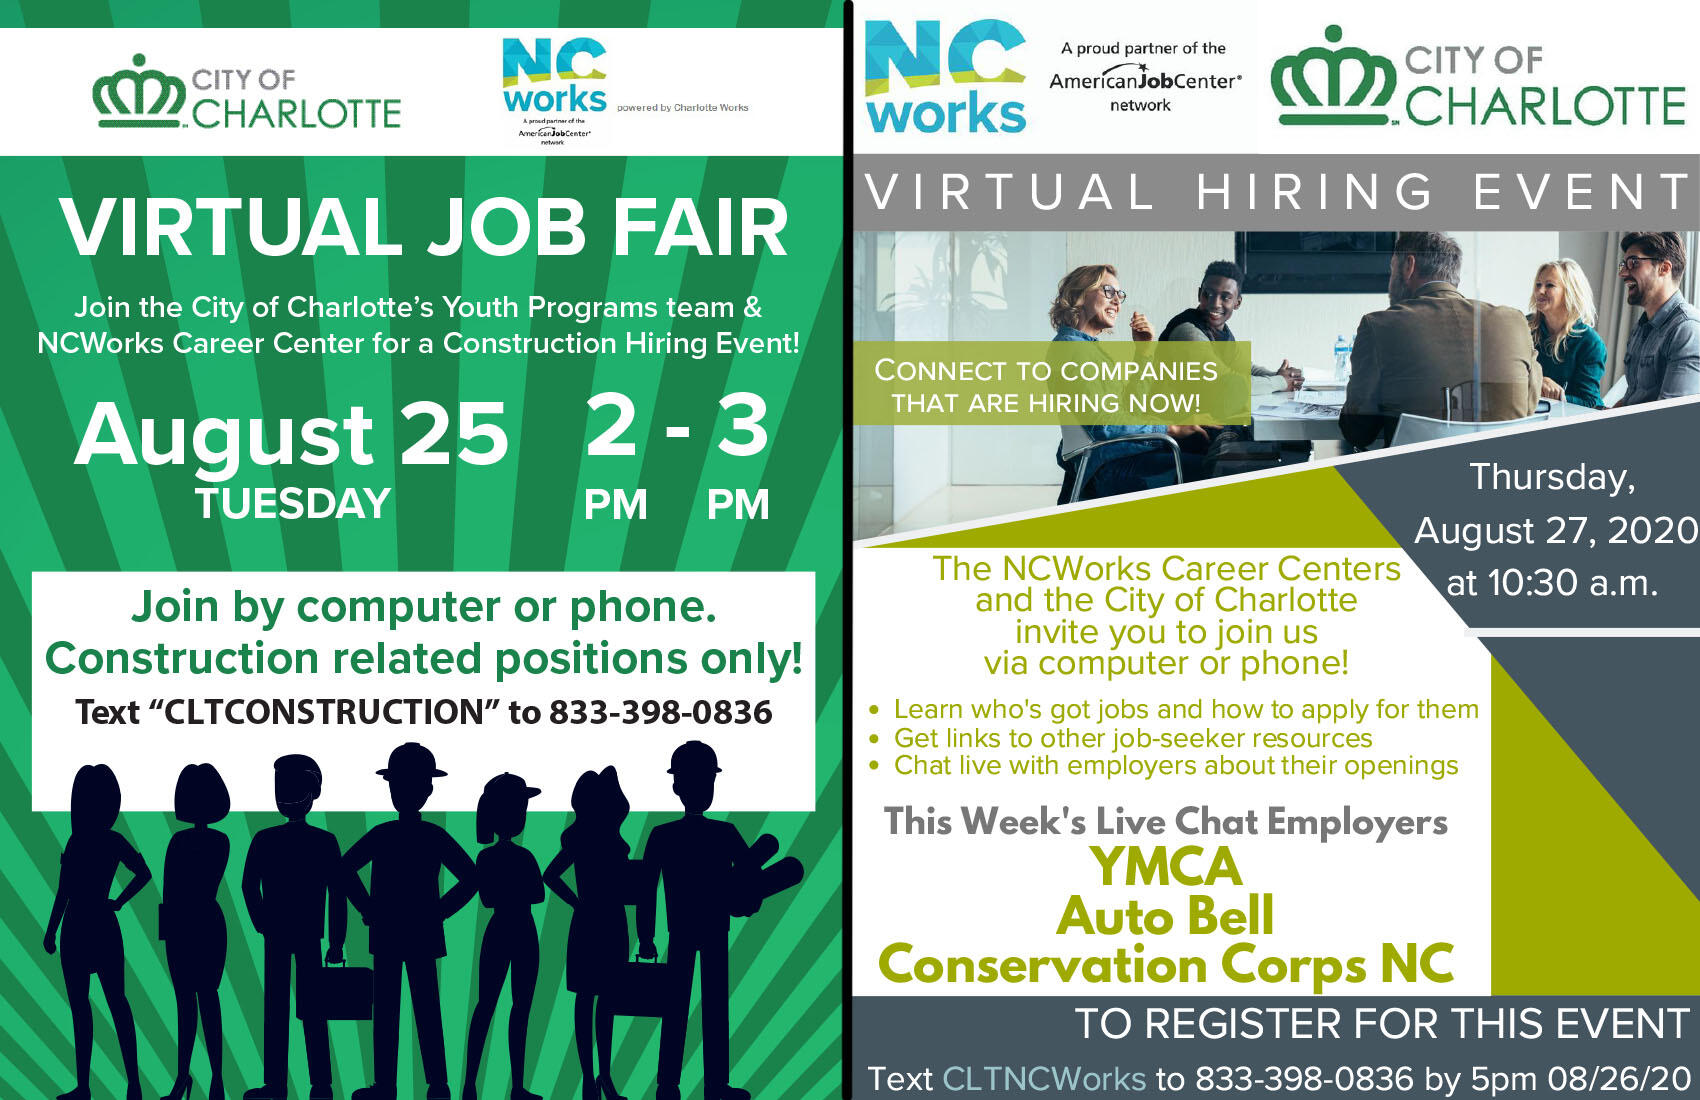 Virtual Job Fairs and COVID19 Emergency Housing Assistance (City of